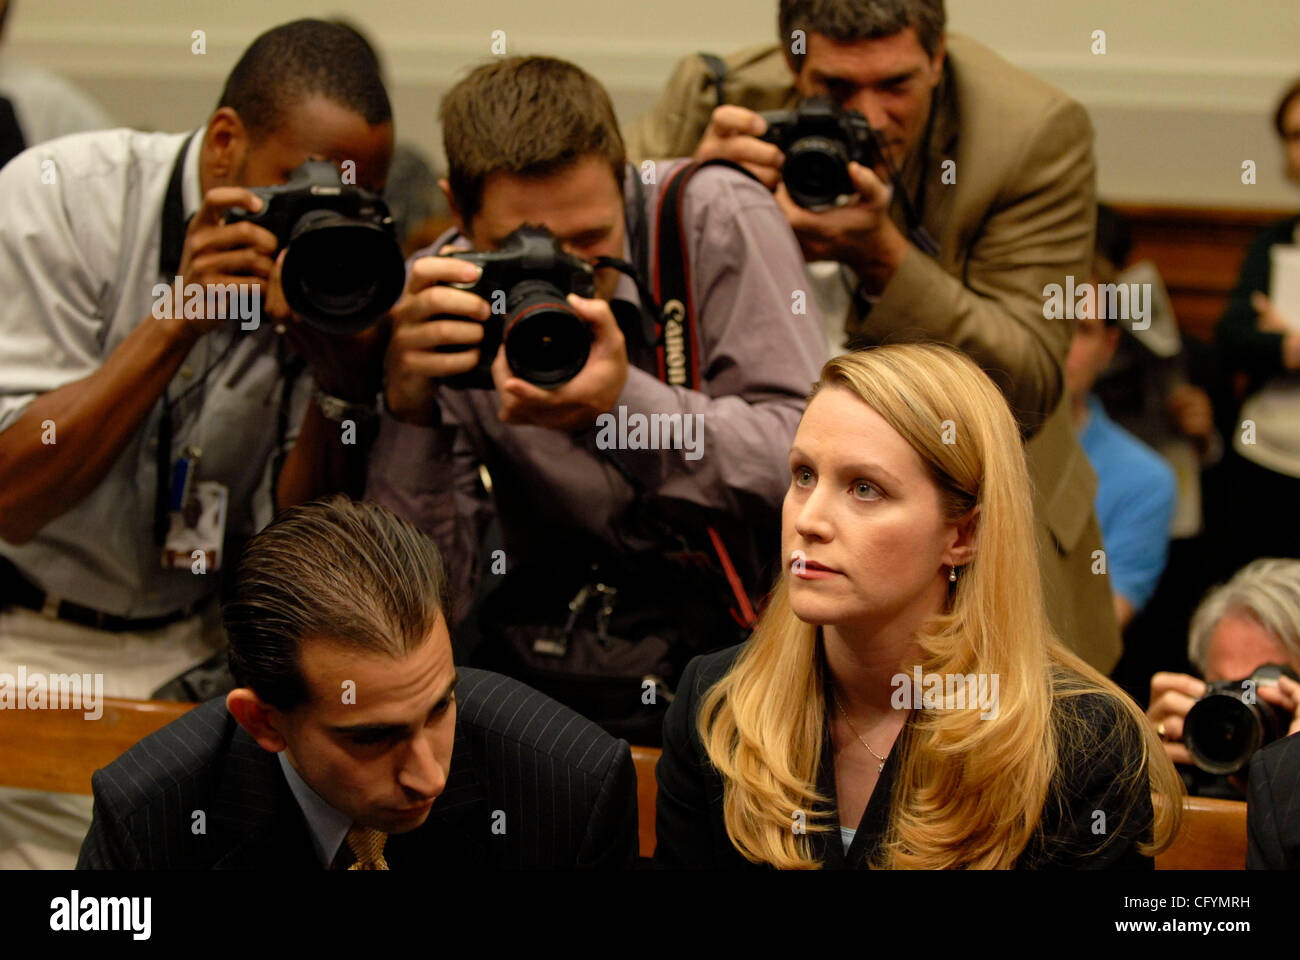 May 23, 2007 - Washington, DC, USA - Former Justice Department liaison to the White House, MONICA GOODLING, prepares to testify before the House Judiciary committee about her role in the firing of US attorneys in late 2006 and early 2007. (Credit Image: Â© Mark Murrmann/ZUMA Press) Stock Photo